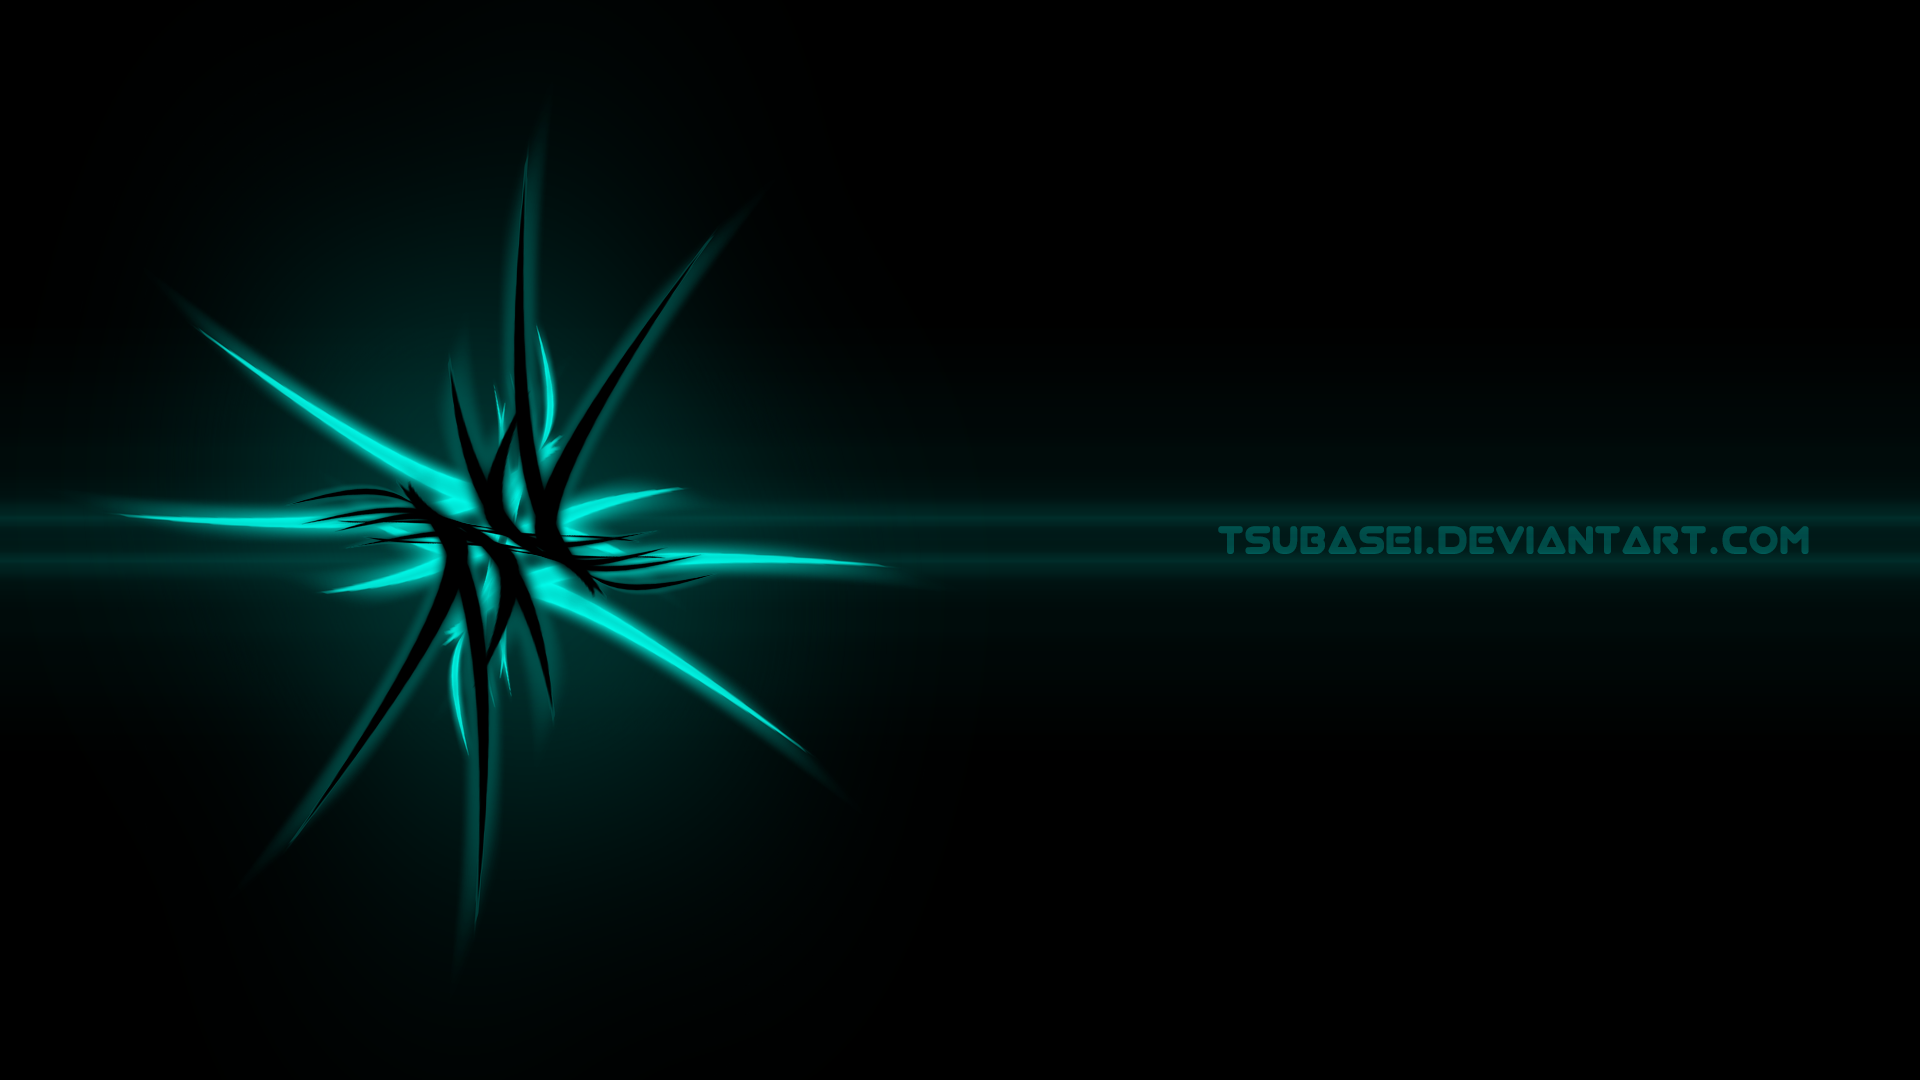 Black And Turquoise Wallpapers